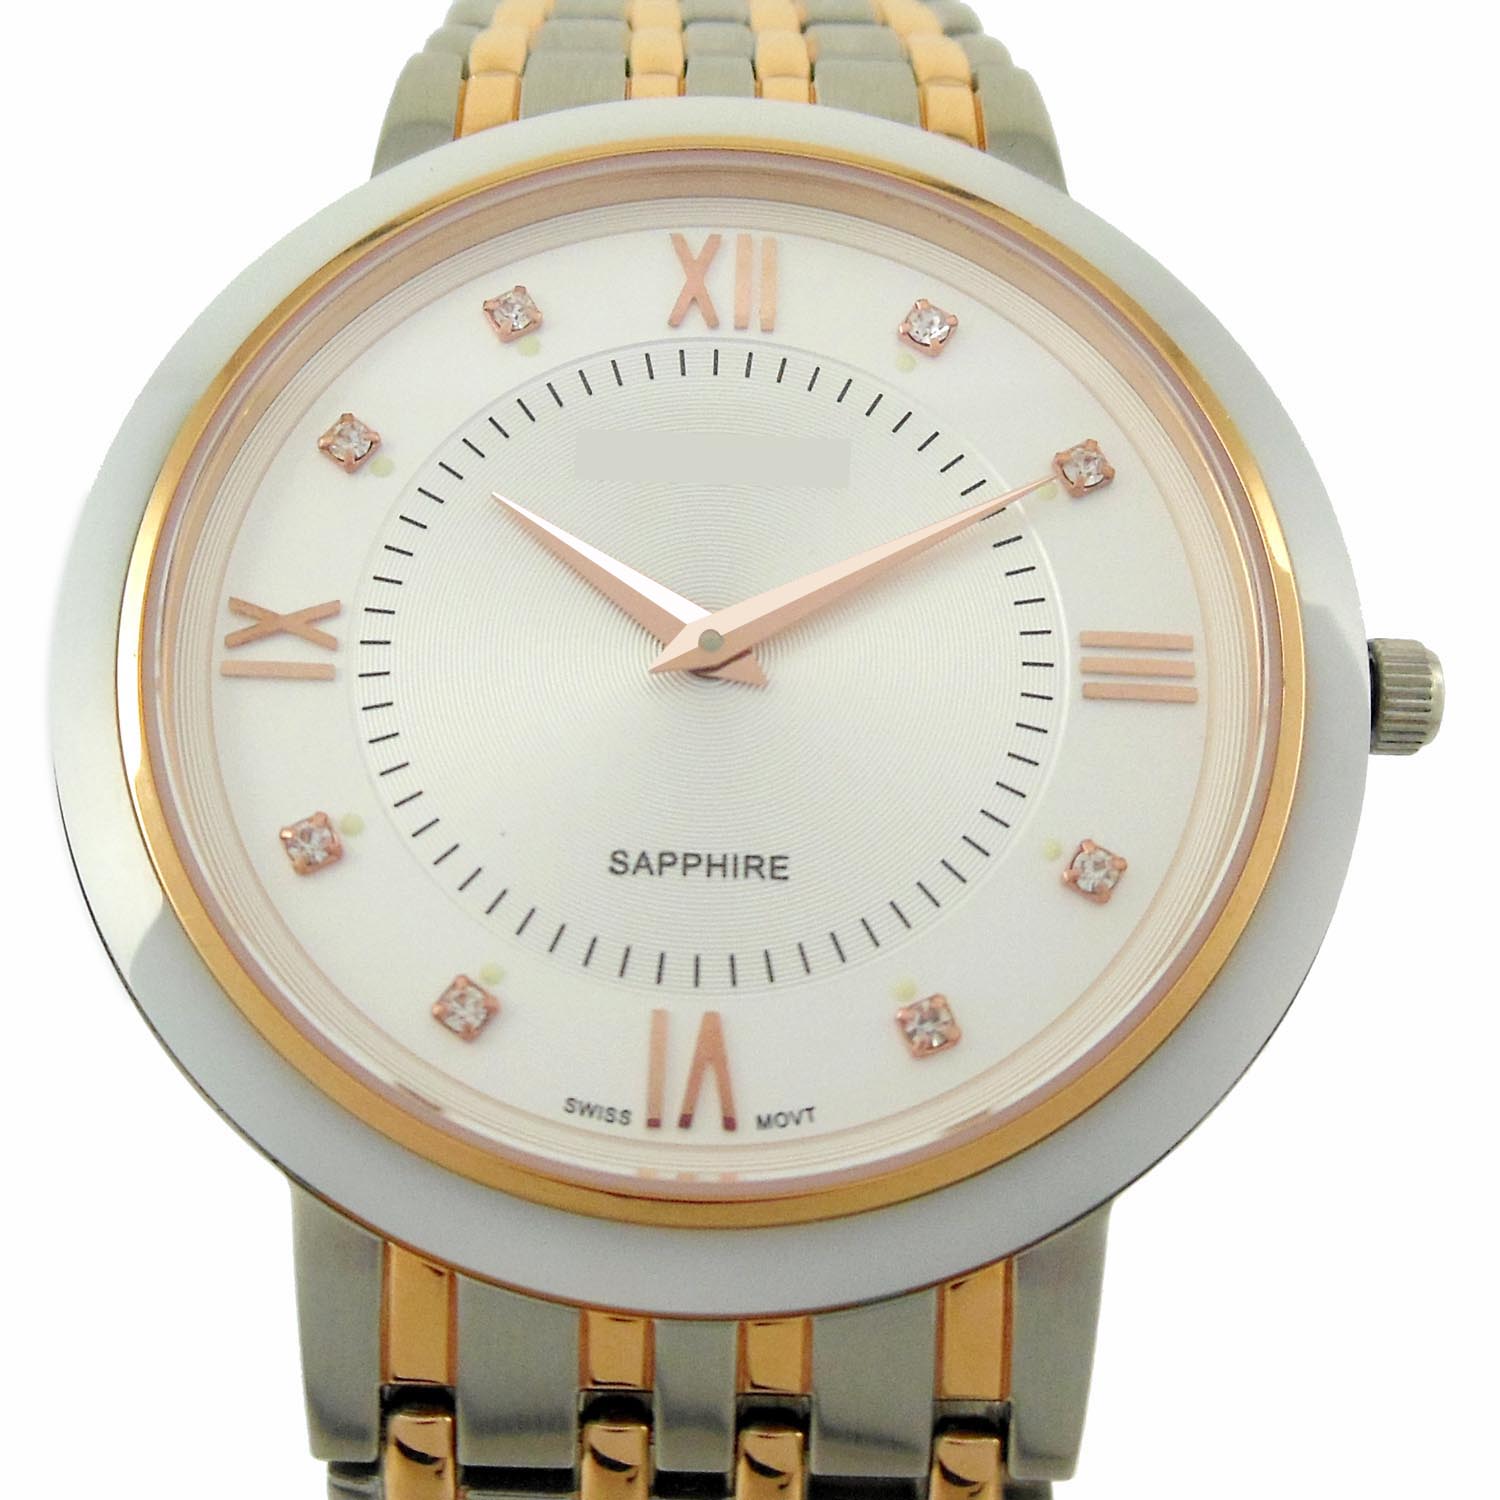 Two-tone luminous stainless steel watch